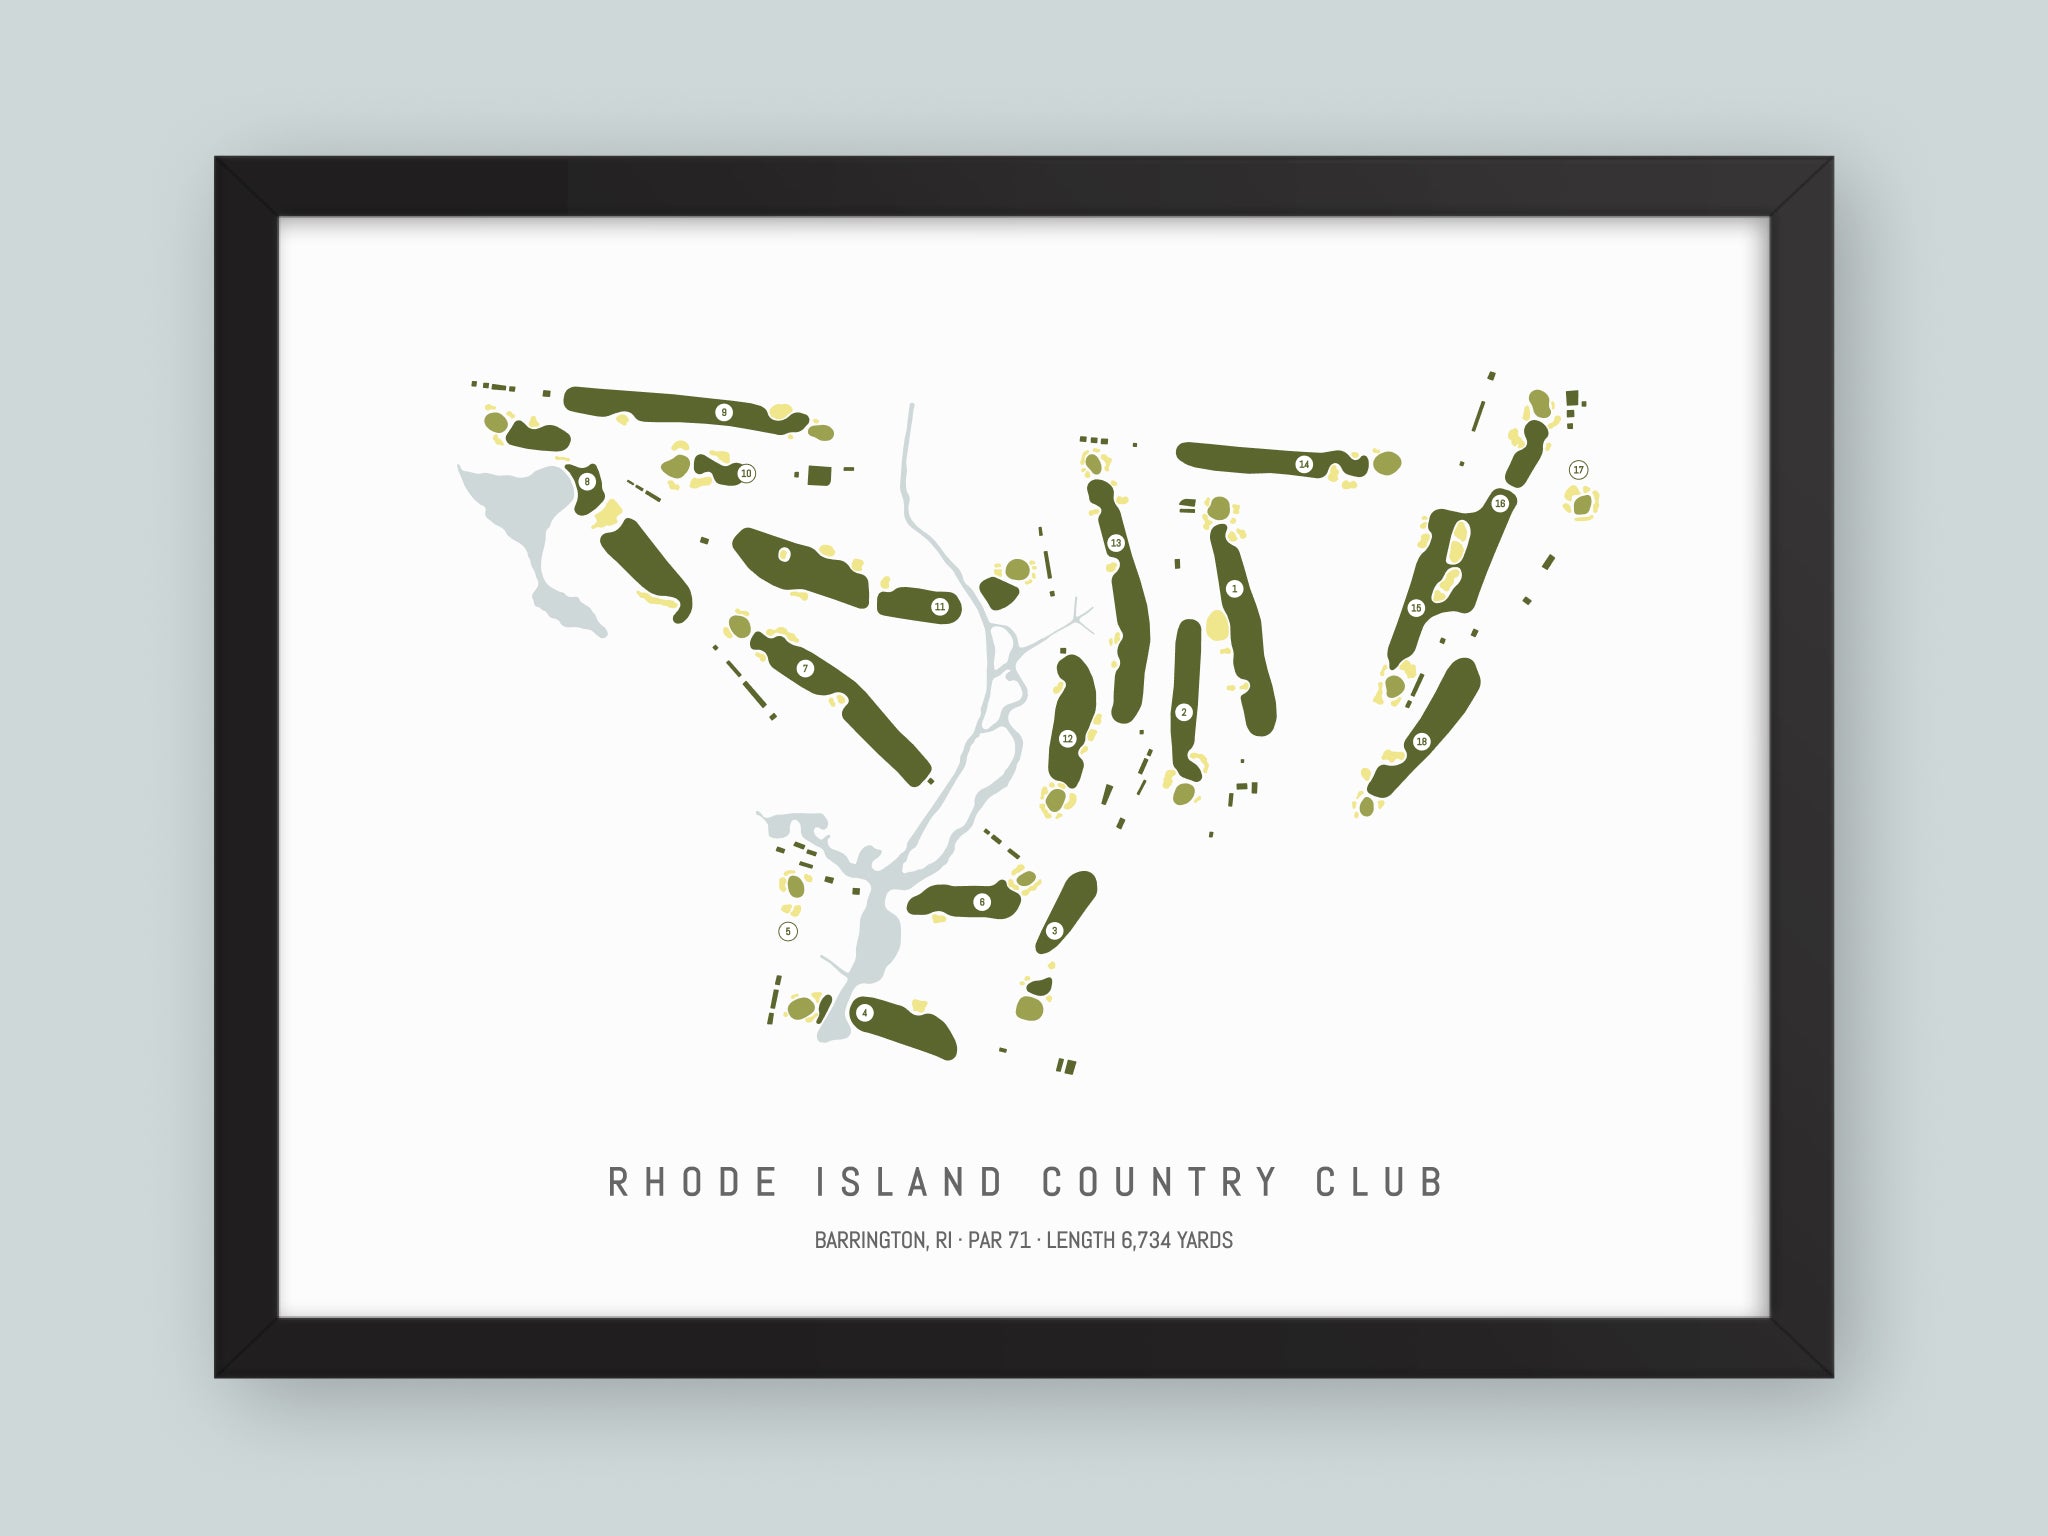 Rhode-Island-Country-Club-RI--Black-Frame-24x18-With-Hole-Numbers